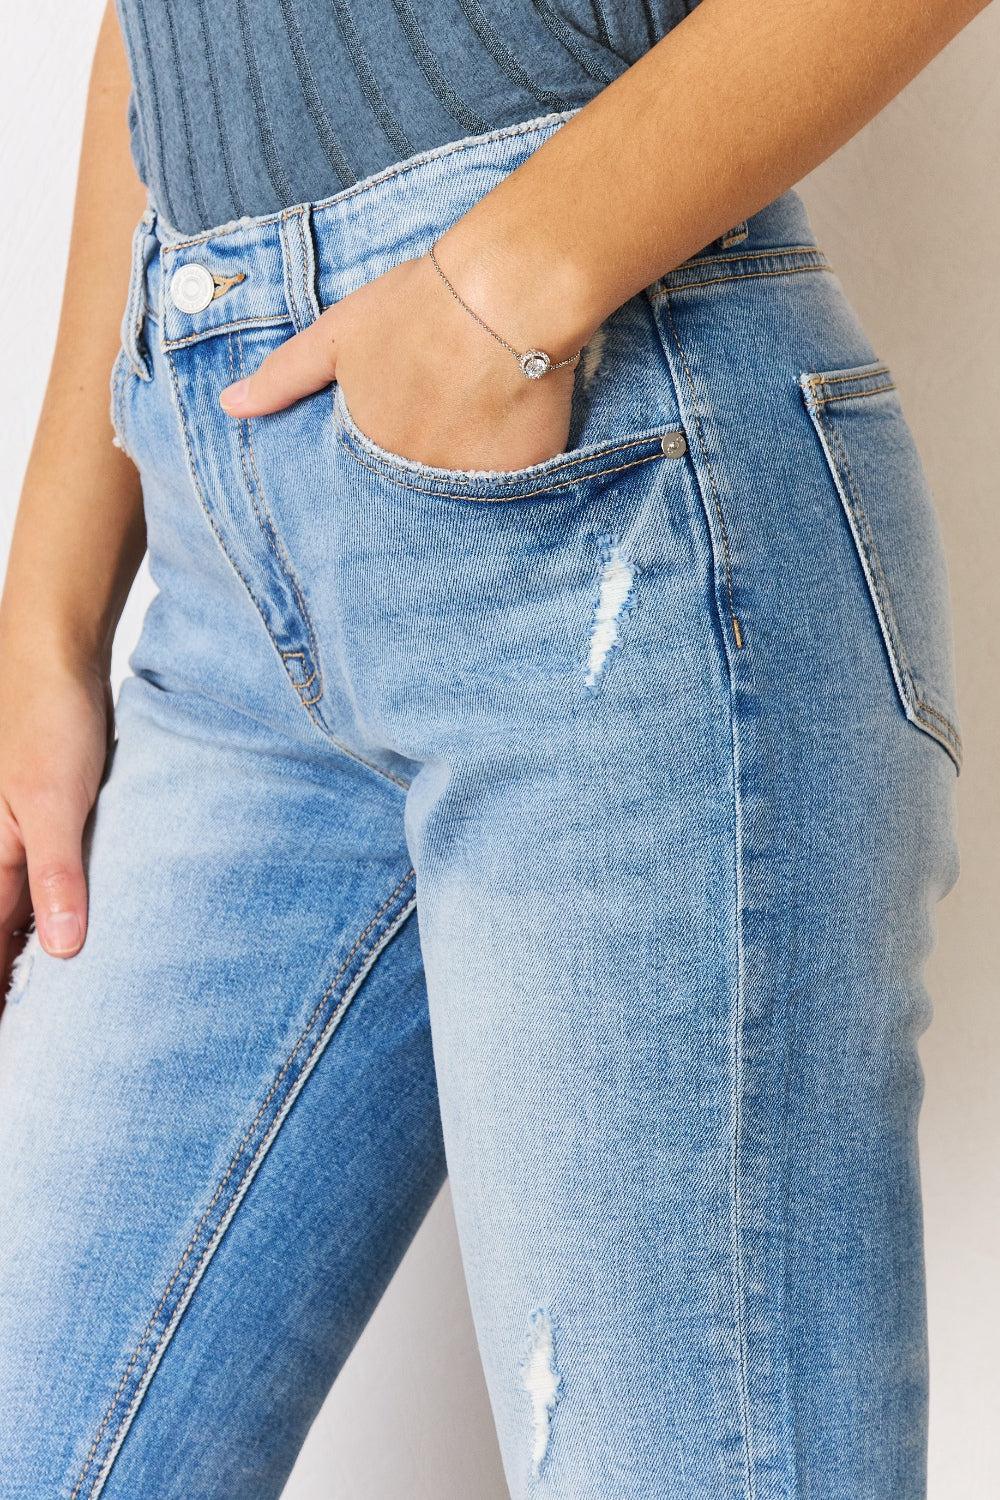 a woman wearing a pair of jeans and a ring